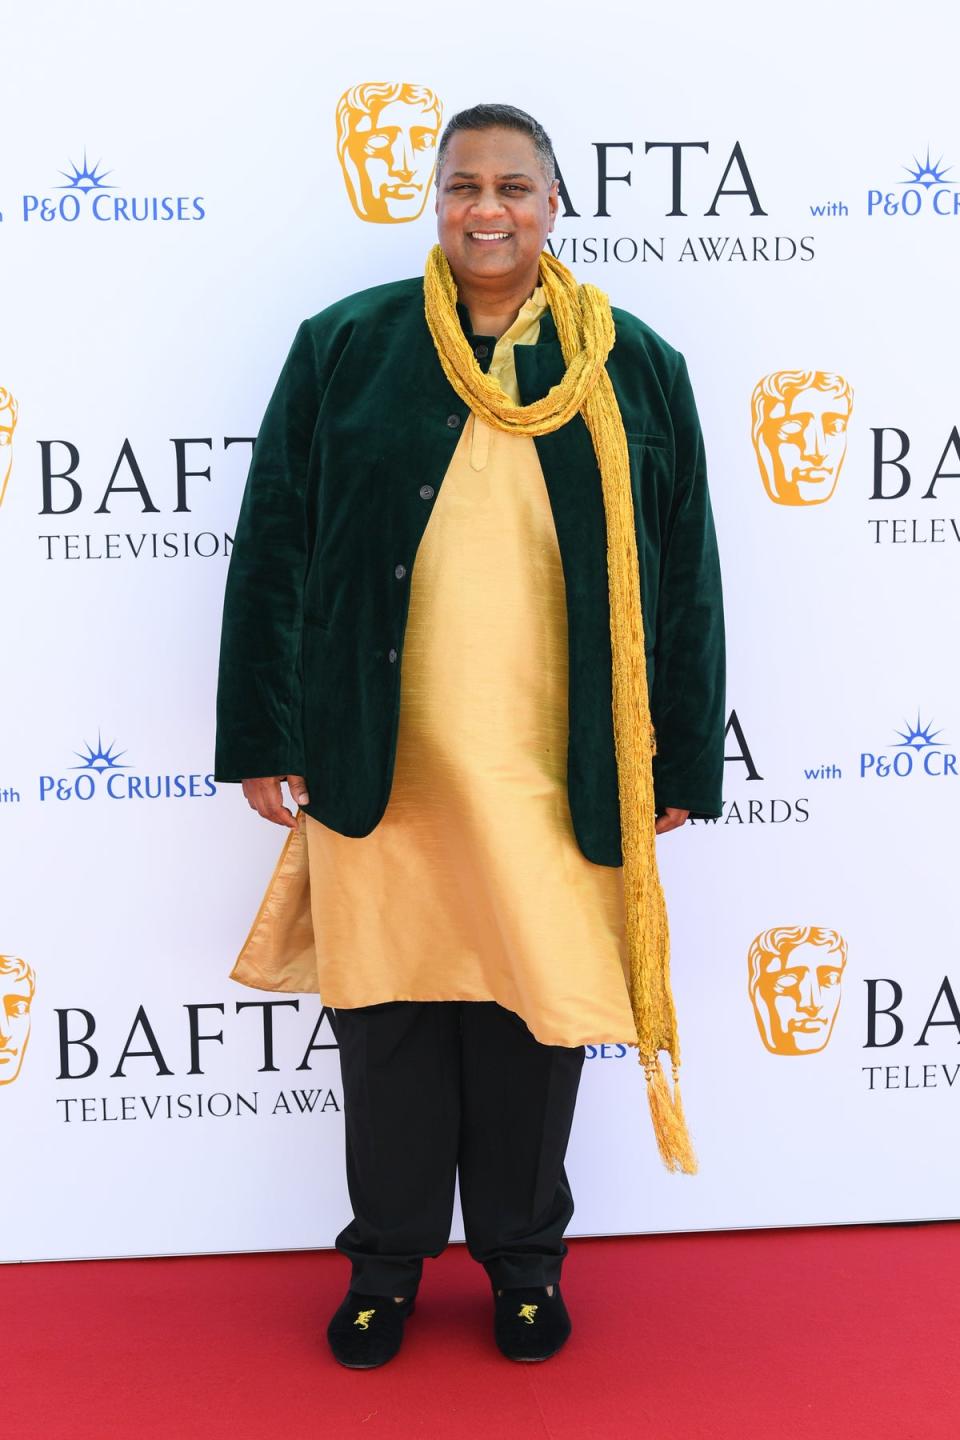 Chair of BAFTA, Krishnendu Majumdar, attends the 2023 BAFTA Television Awards with P&O Cruises at The Royal Festival Hall on May 14, 2023 (Getty Images)